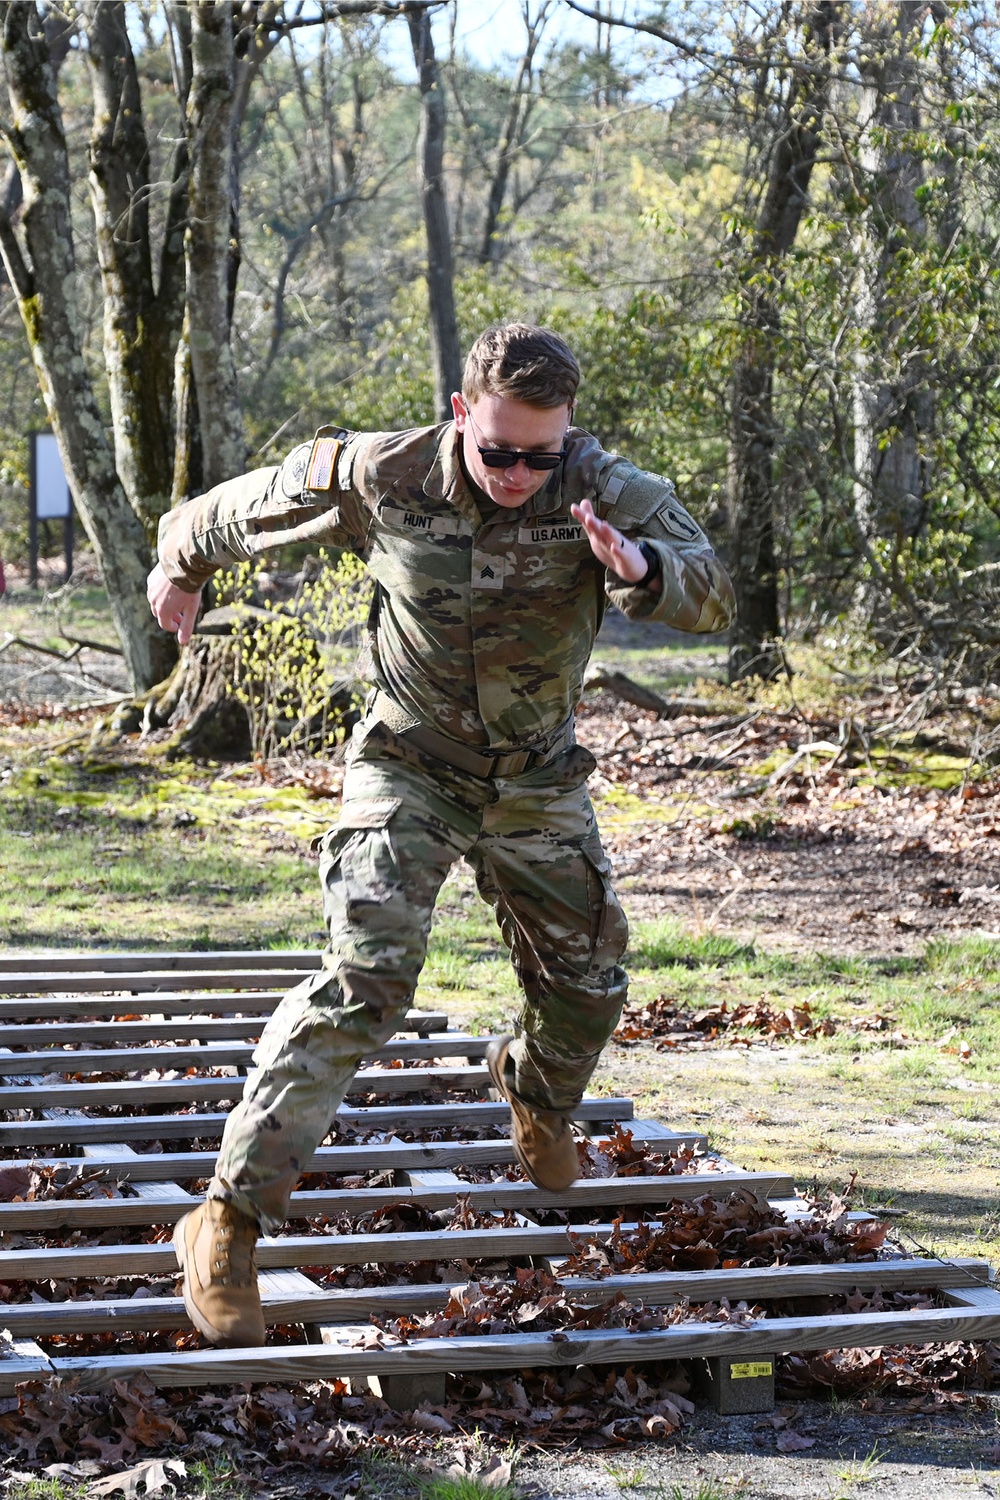 Joint Base McGuire-Dix-Lakehurst – US Army Reserve. USARC CIOR Competitive Camp. obstacle course. 23 April 2024